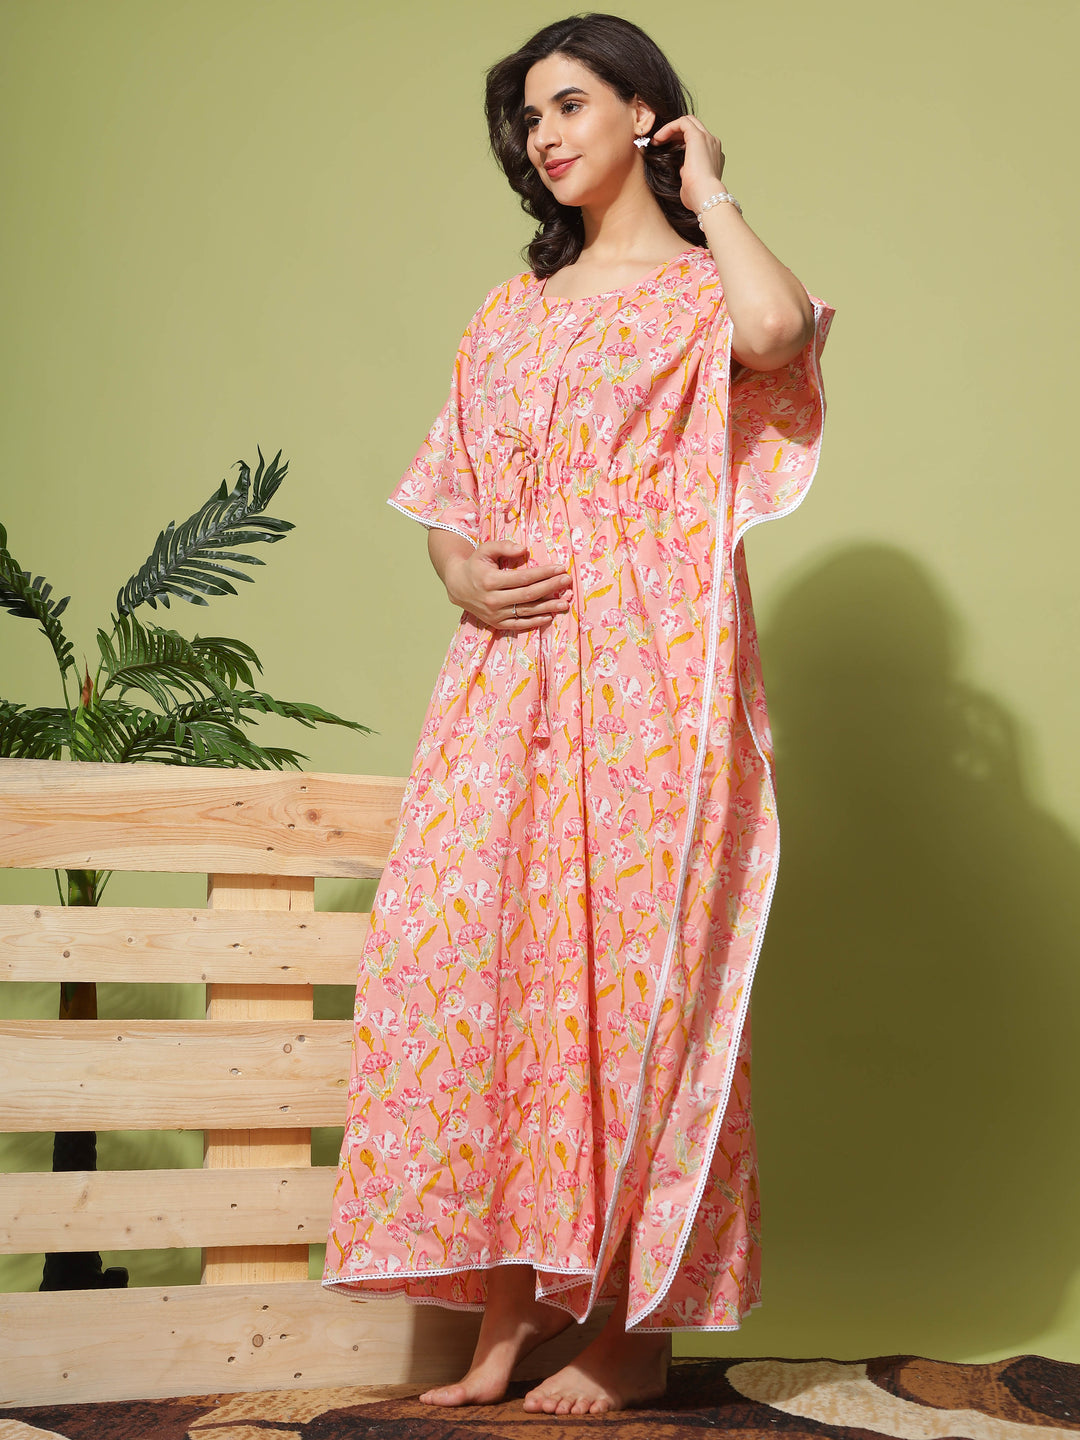 Chic and Functional: Nursing-Friendly Maternity Kaftan in Peach